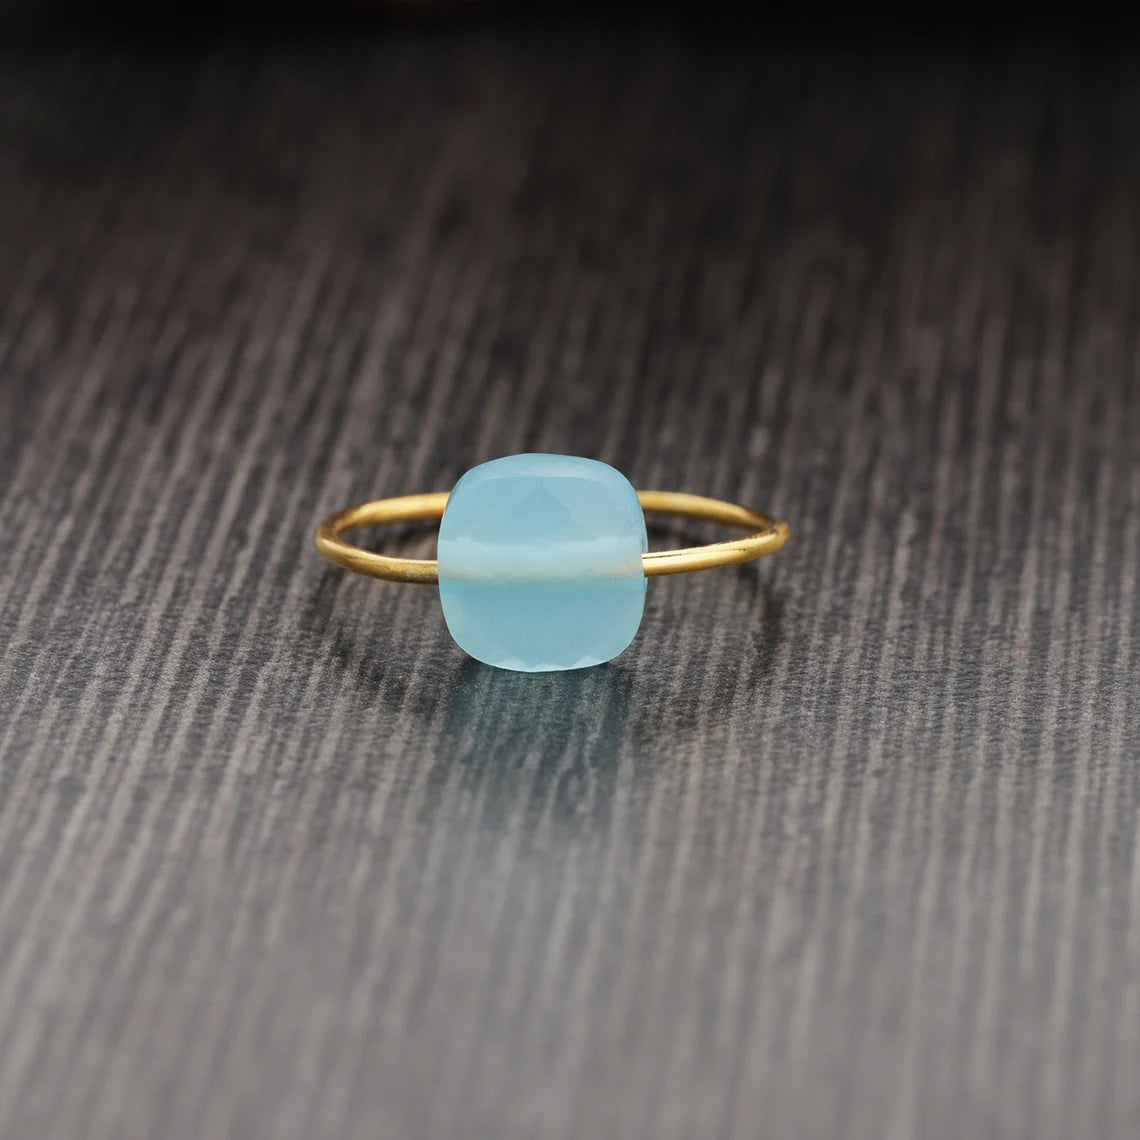 Blue Chalcedony Ring - Gold Ring - Blue Calcedony Faceted Ring - Gemstone Ring - Drill Stone Ring - Natural Chalcedony Ring